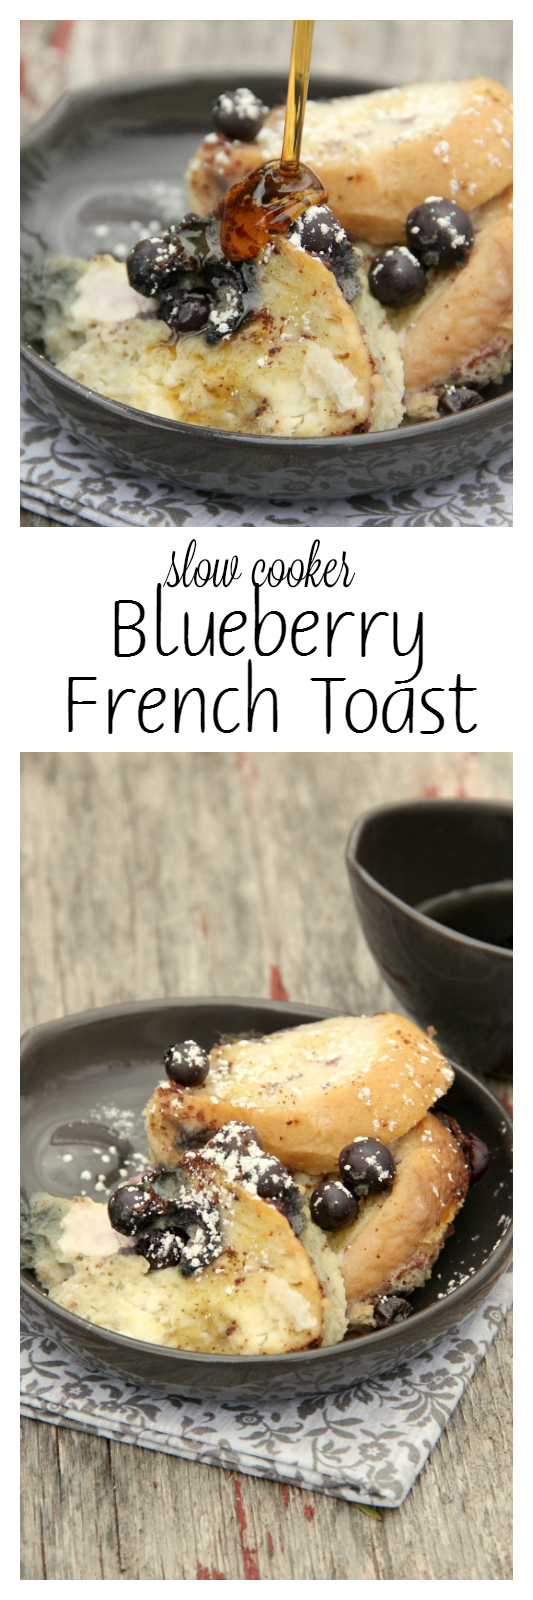 Need a brunch recipe? This Slow Cooker Blueberry French Toast is so easy to throw together and cooks up quickly in only about 3 hours, so it's perfect for brunch.